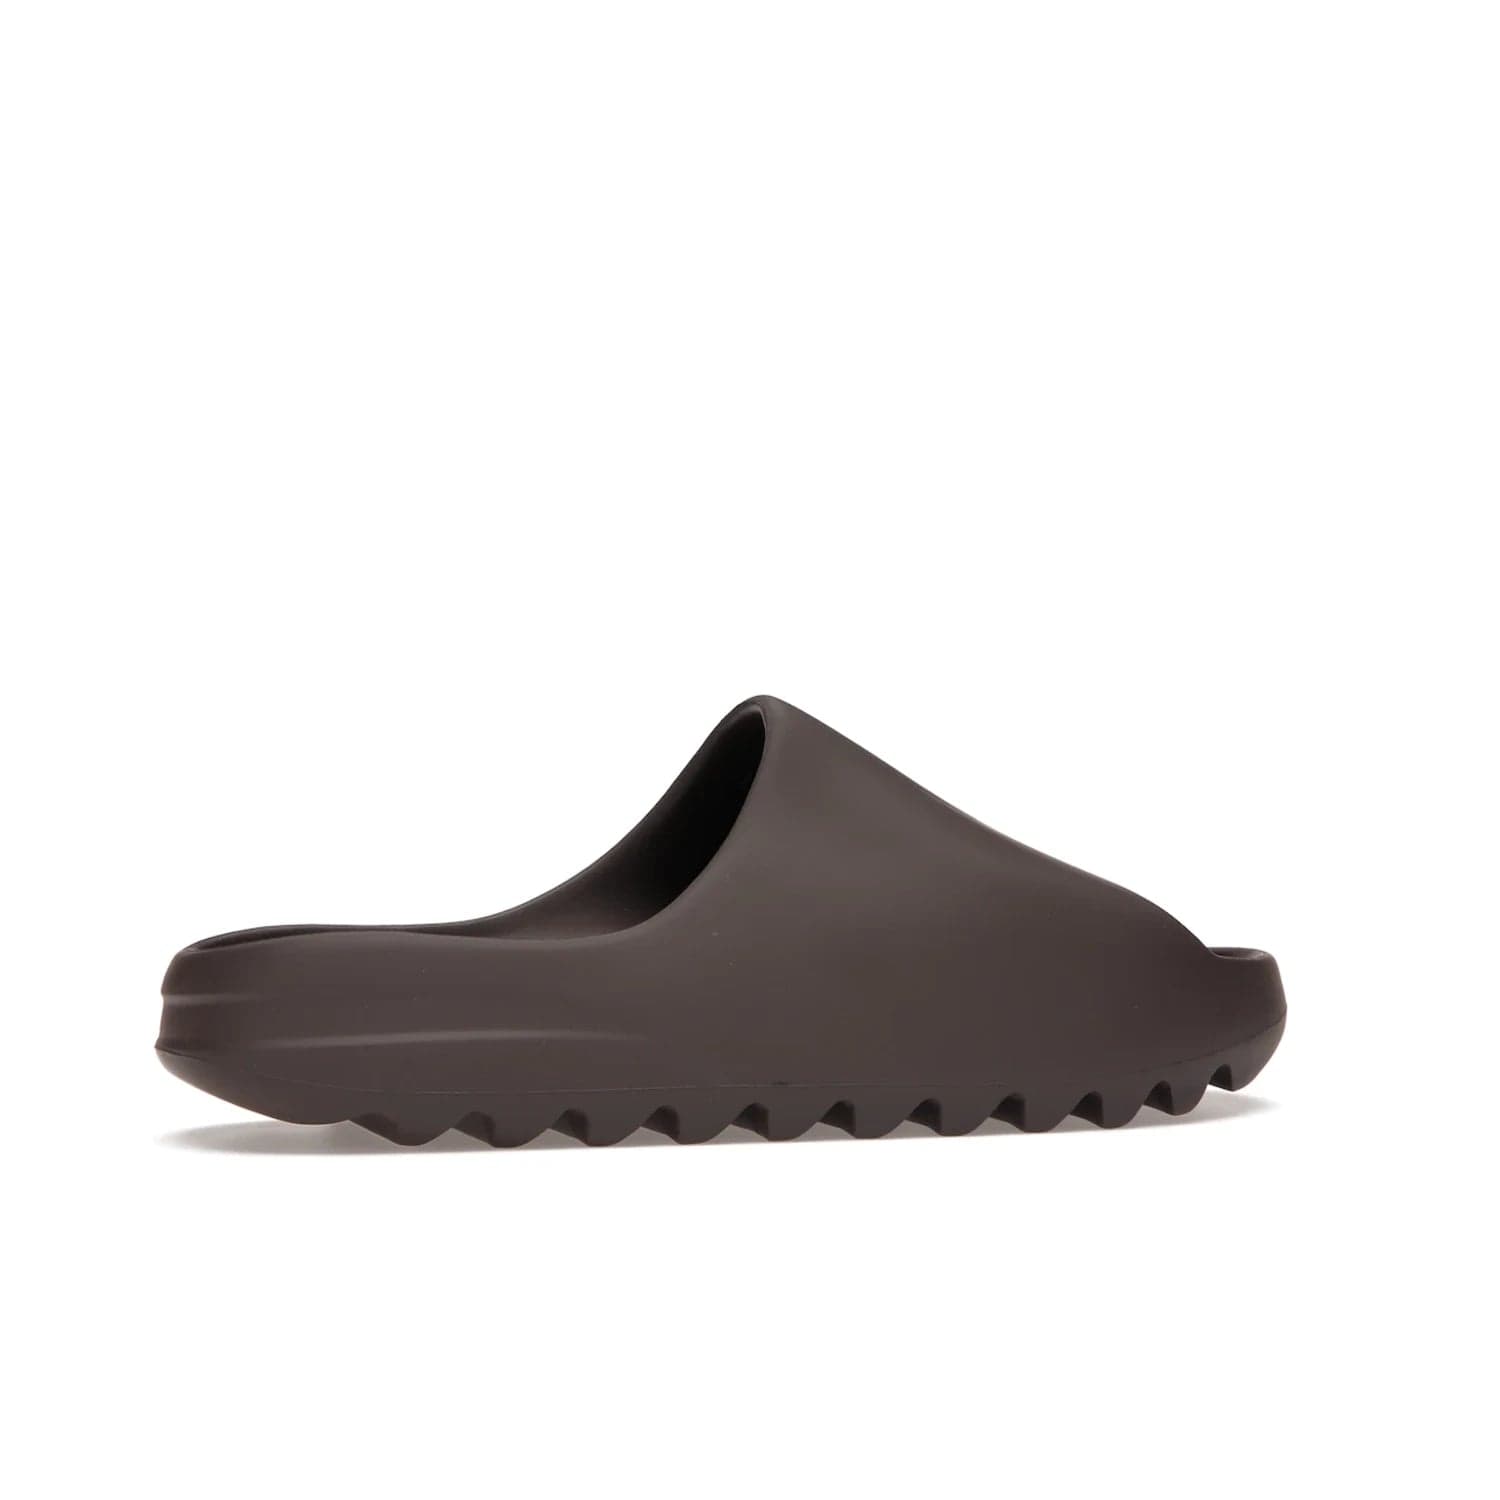 adidas Yeezy Slide Soot - Image 35 - Only at www.BallersClubKickz.com - Shop the Yeezy Slide Soot sneaker by Adidas, a sleek blend of form and function. Monochrome silhouette in Soot/Soot/Soot. Lightweight EVA foam offers comfort and durability. Get the must-have style today.